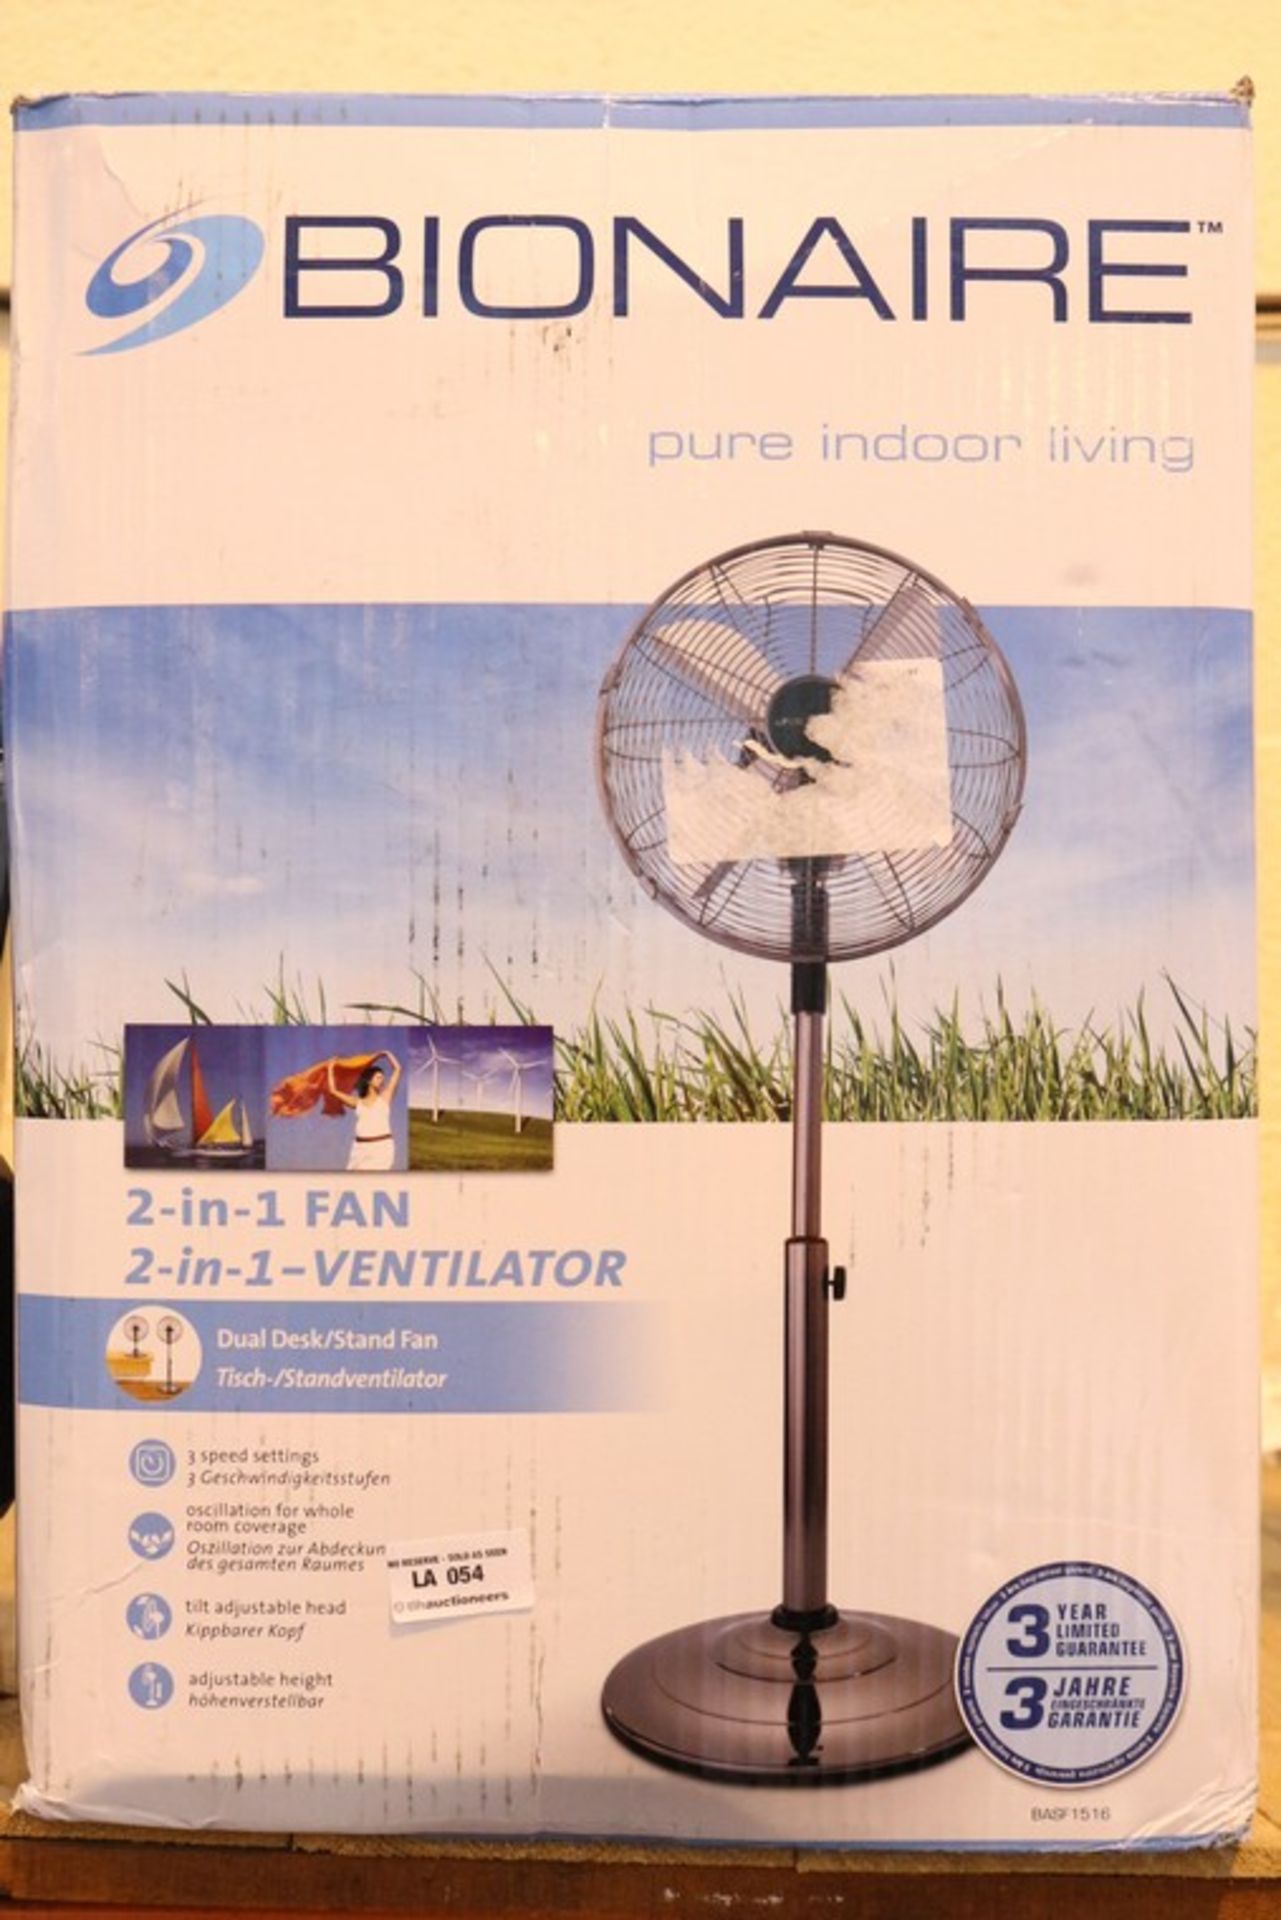 1 x BOXED BIONAIRE 2 IN 1 UPRIGHT VENTILATOR RRP £50 *PLEASE NOTE THAT THE BID PRICE IS MULTIPLIED